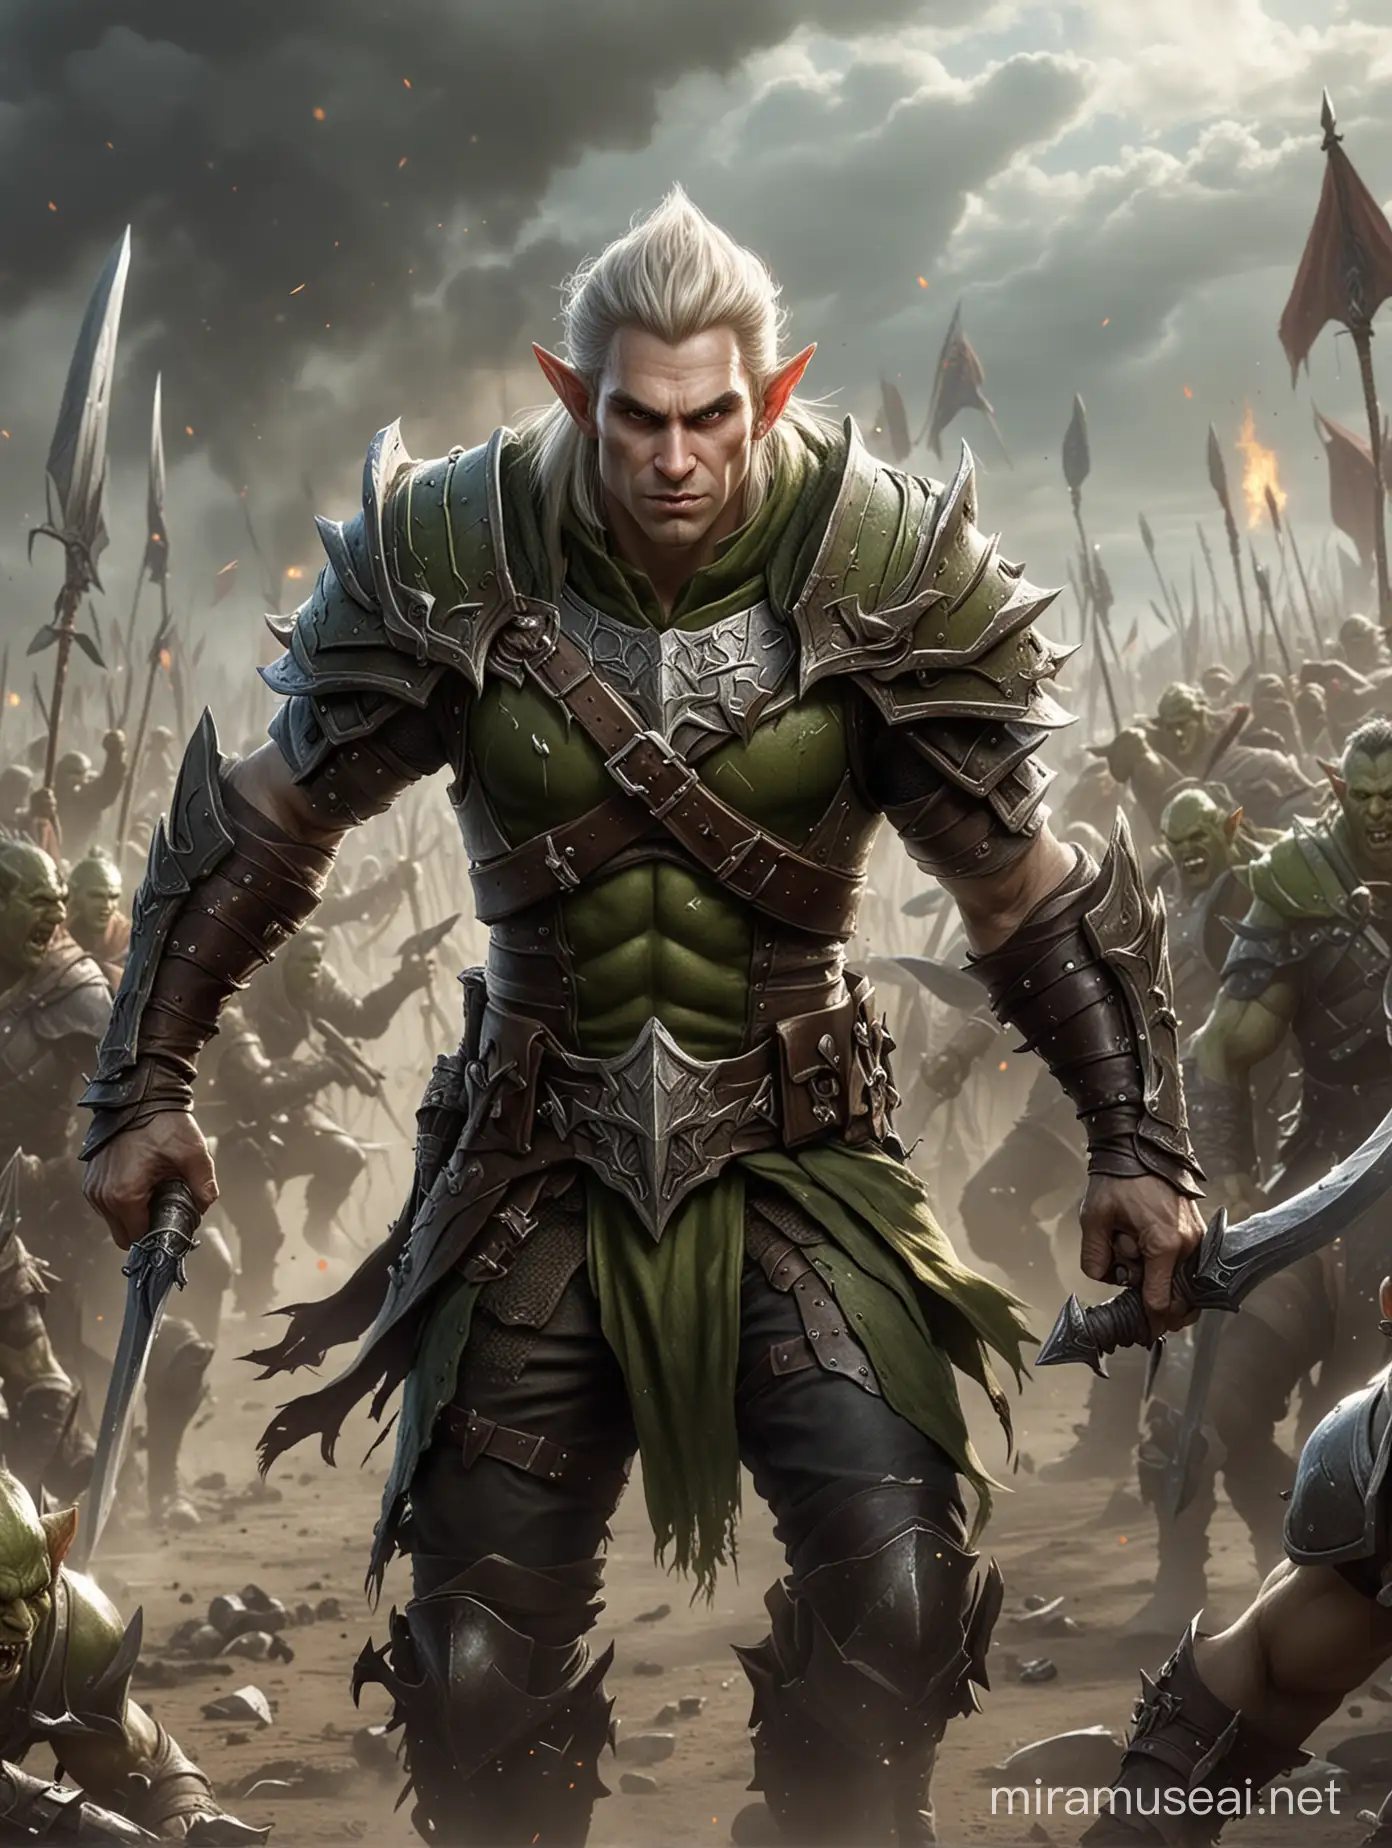 create the image of a crazy but handsome elf warrior on the battlefield, fighting off an army of orcs